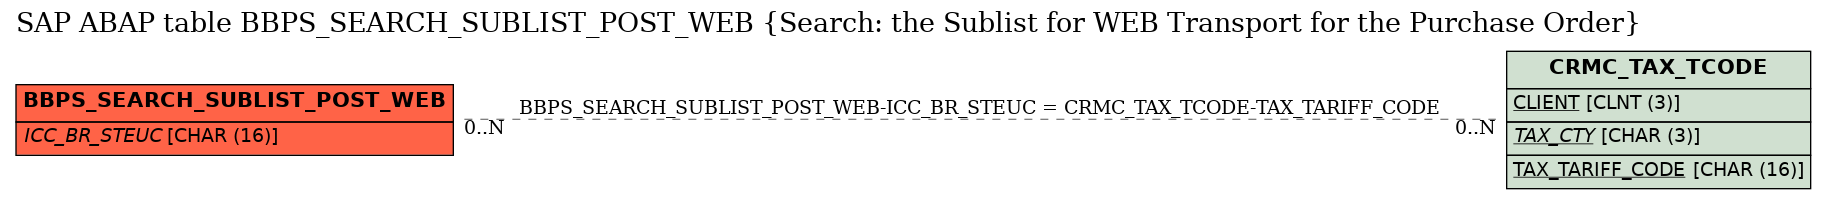 E-R Diagram for table BBPS_SEARCH_SUBLIST_POST_WEB (Search: the Sublist for WEB Transport for the Purchase Order)